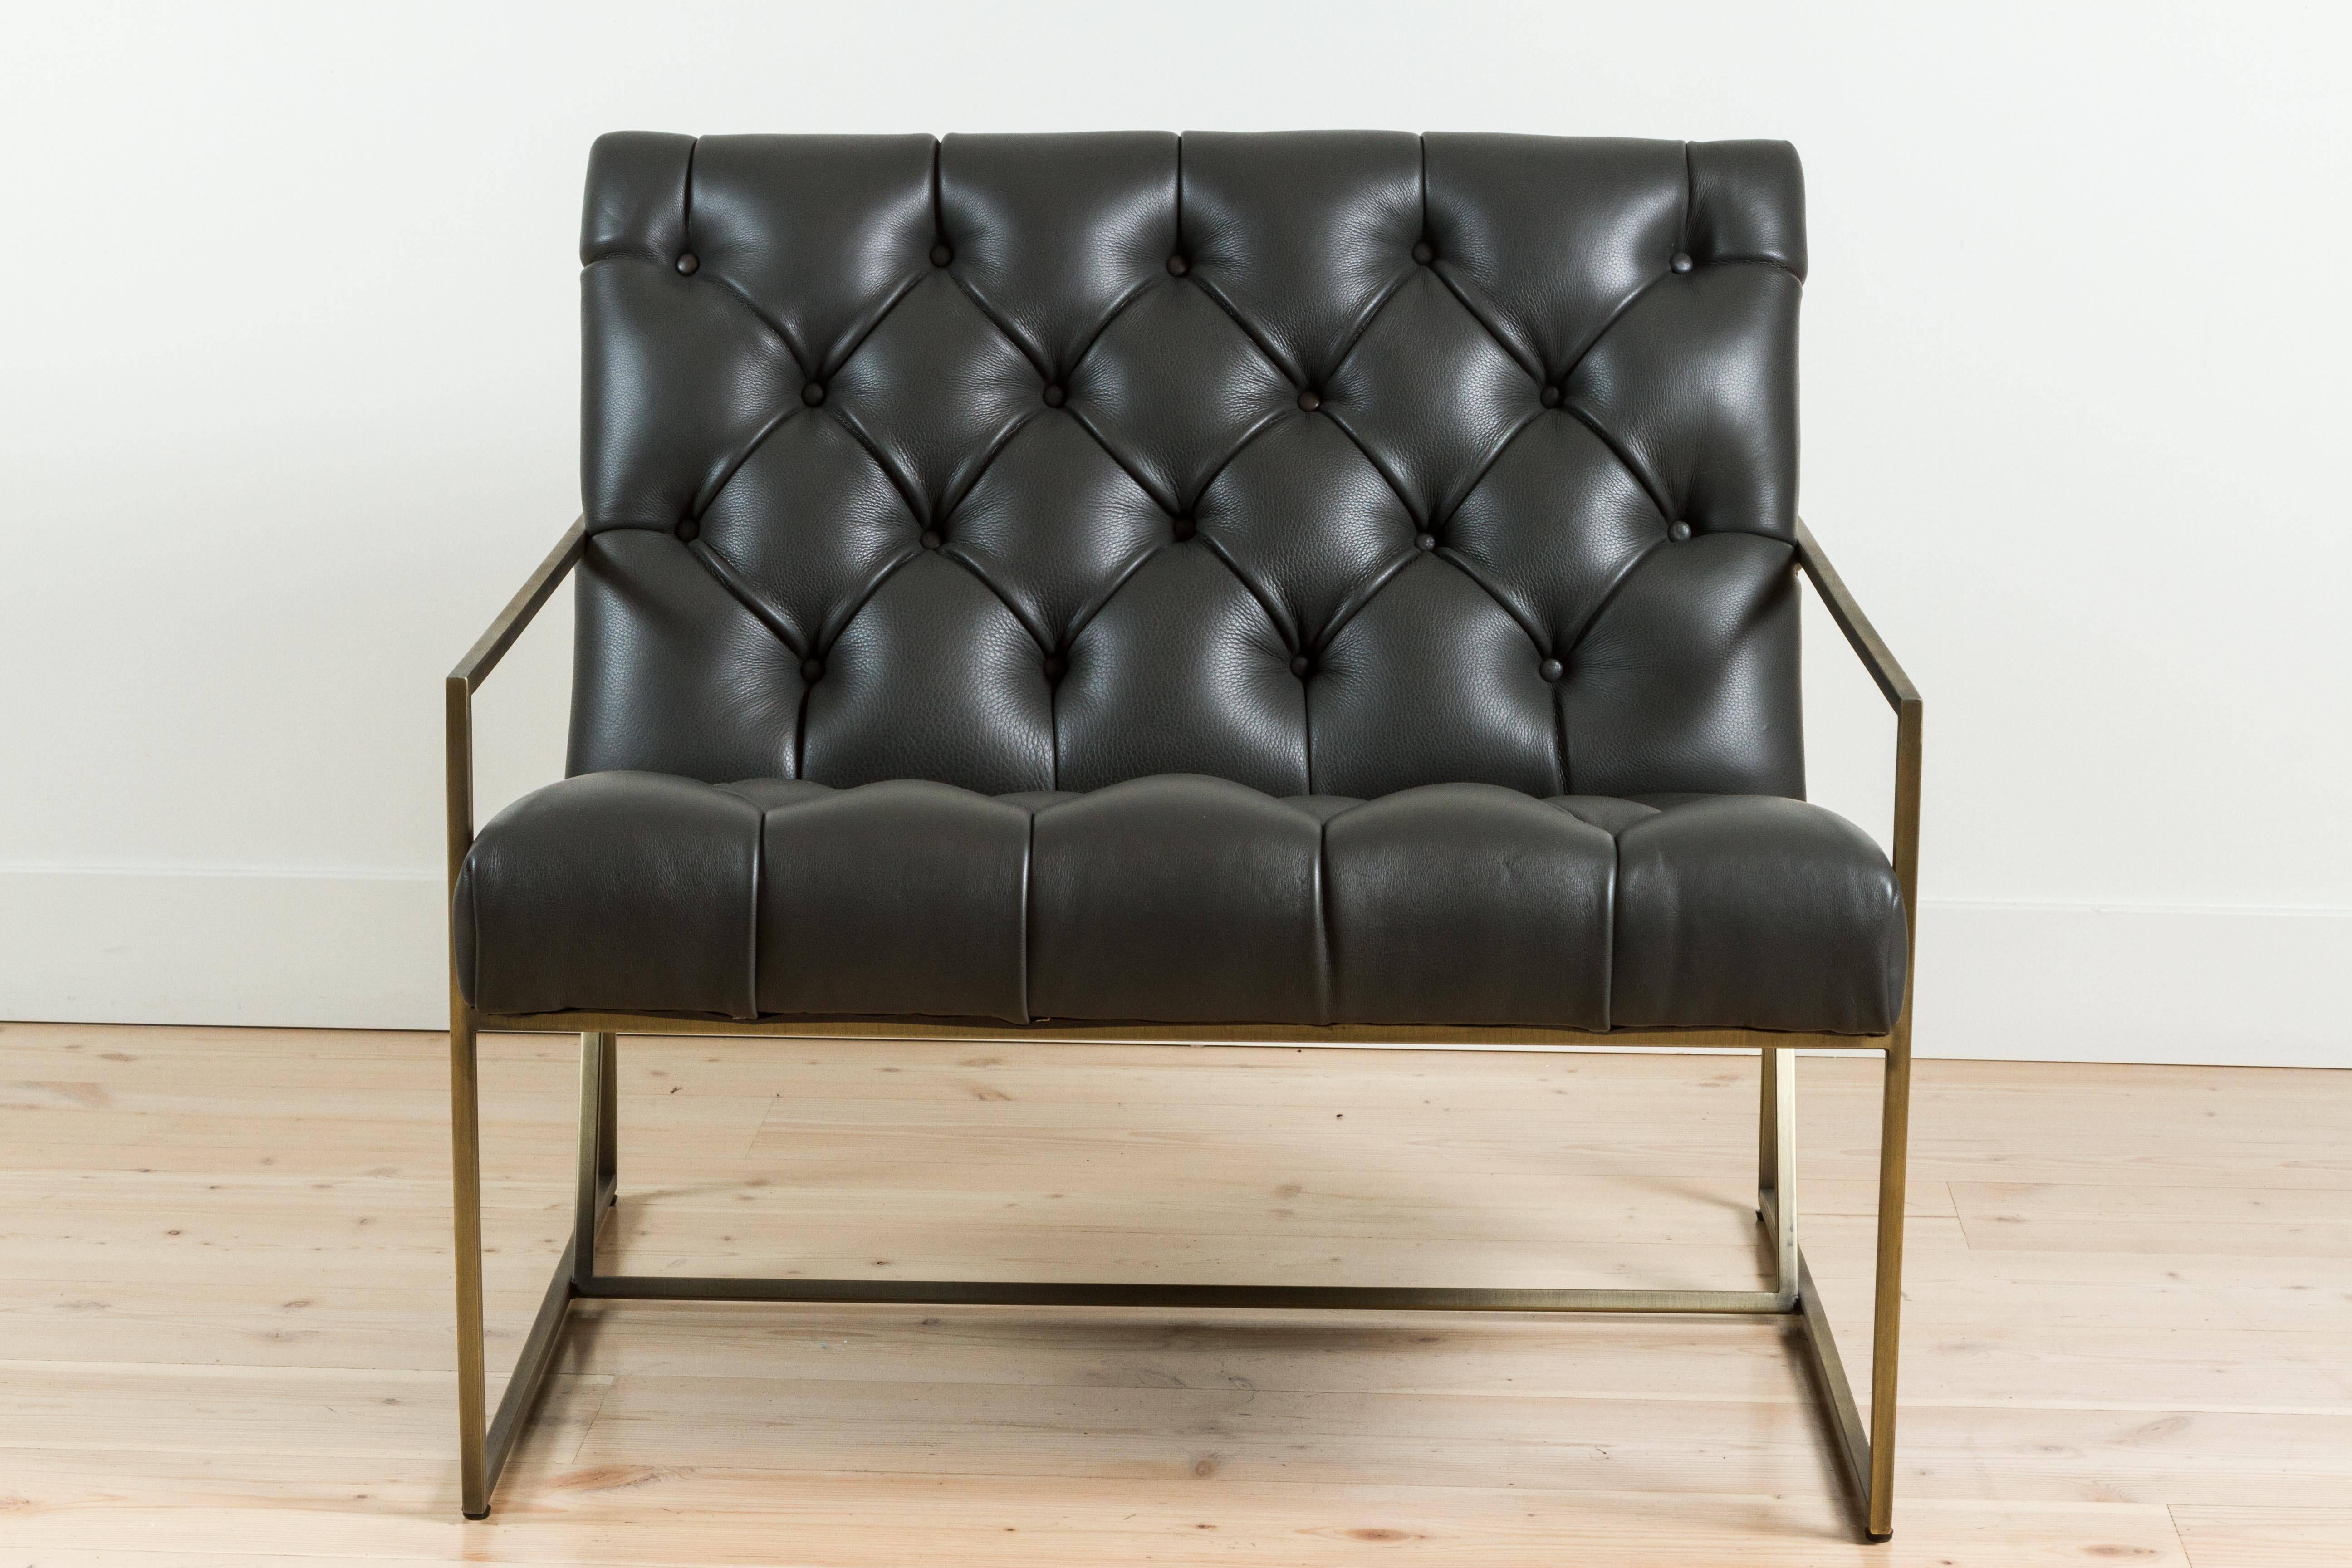 Contemporary Thin Frame Lounge Chair in Diamond Tufted Charcoal Leather by Lawson-Fenning